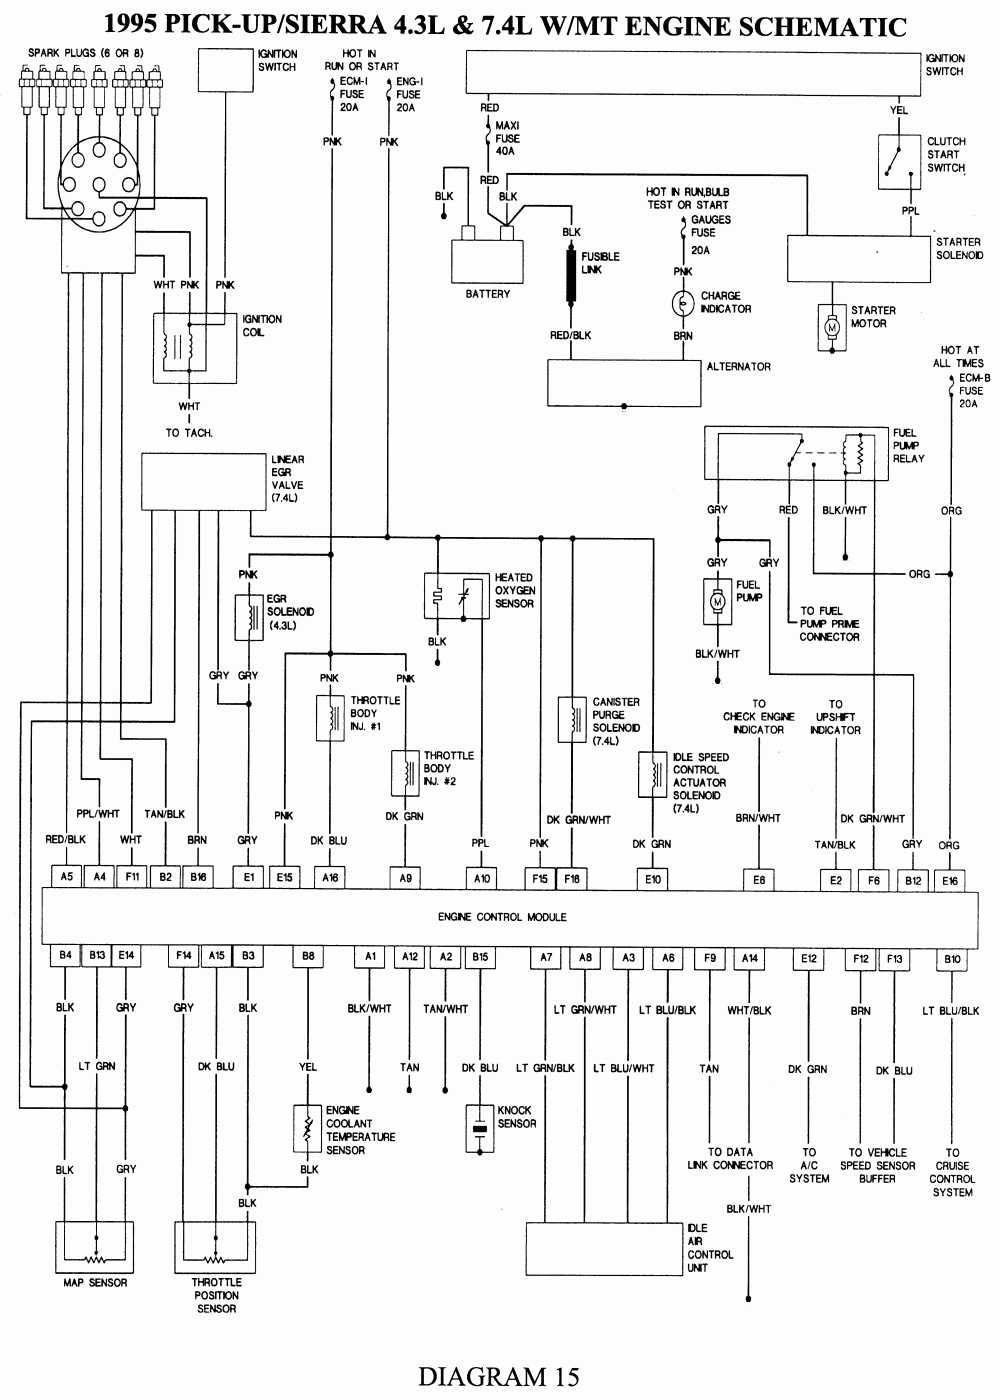 1987 Chevy Monte Carlo Ss Ignition Wiring Diagram Schematic And